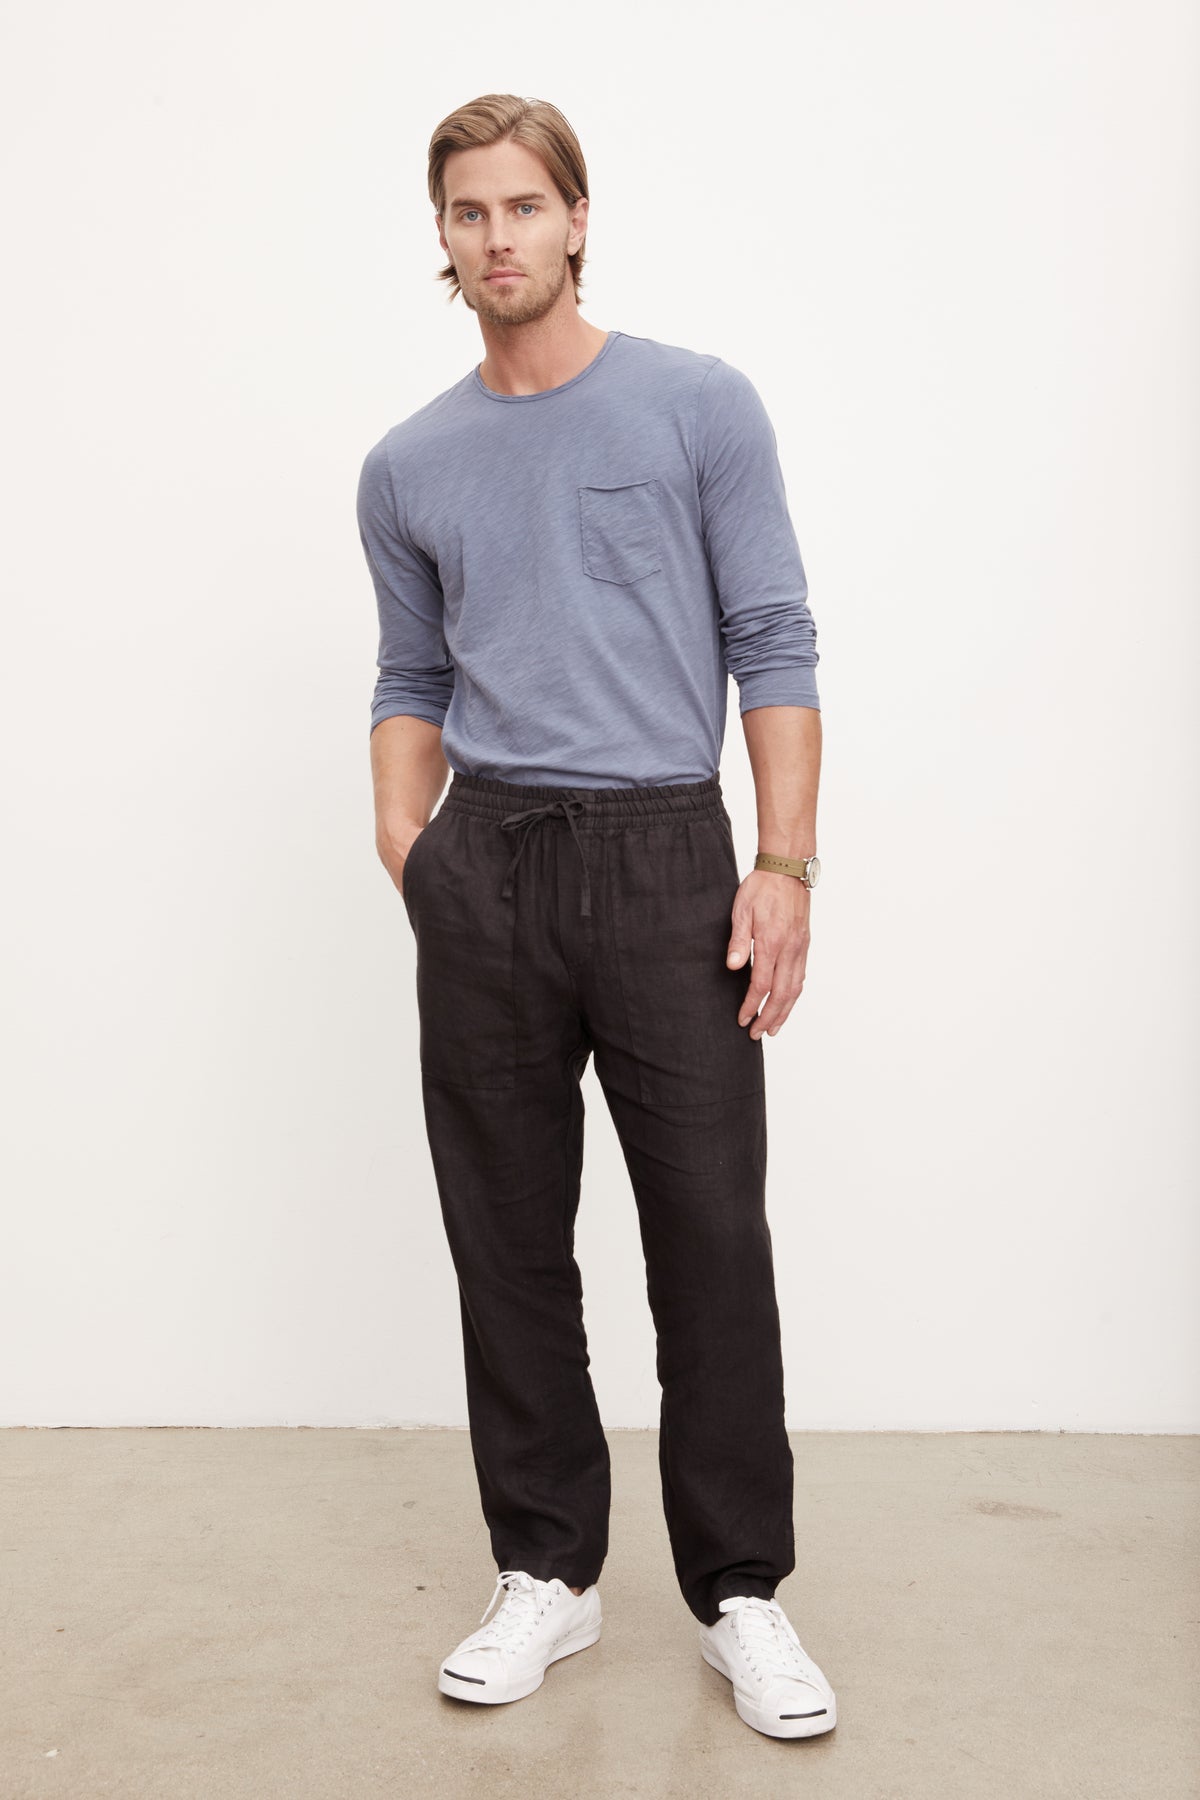 A man in a blue t-shirt and jeans is standing in front of a white wall wearing Velvet by Graham & Spencer's Phelan Linen Pant.-36009949429953